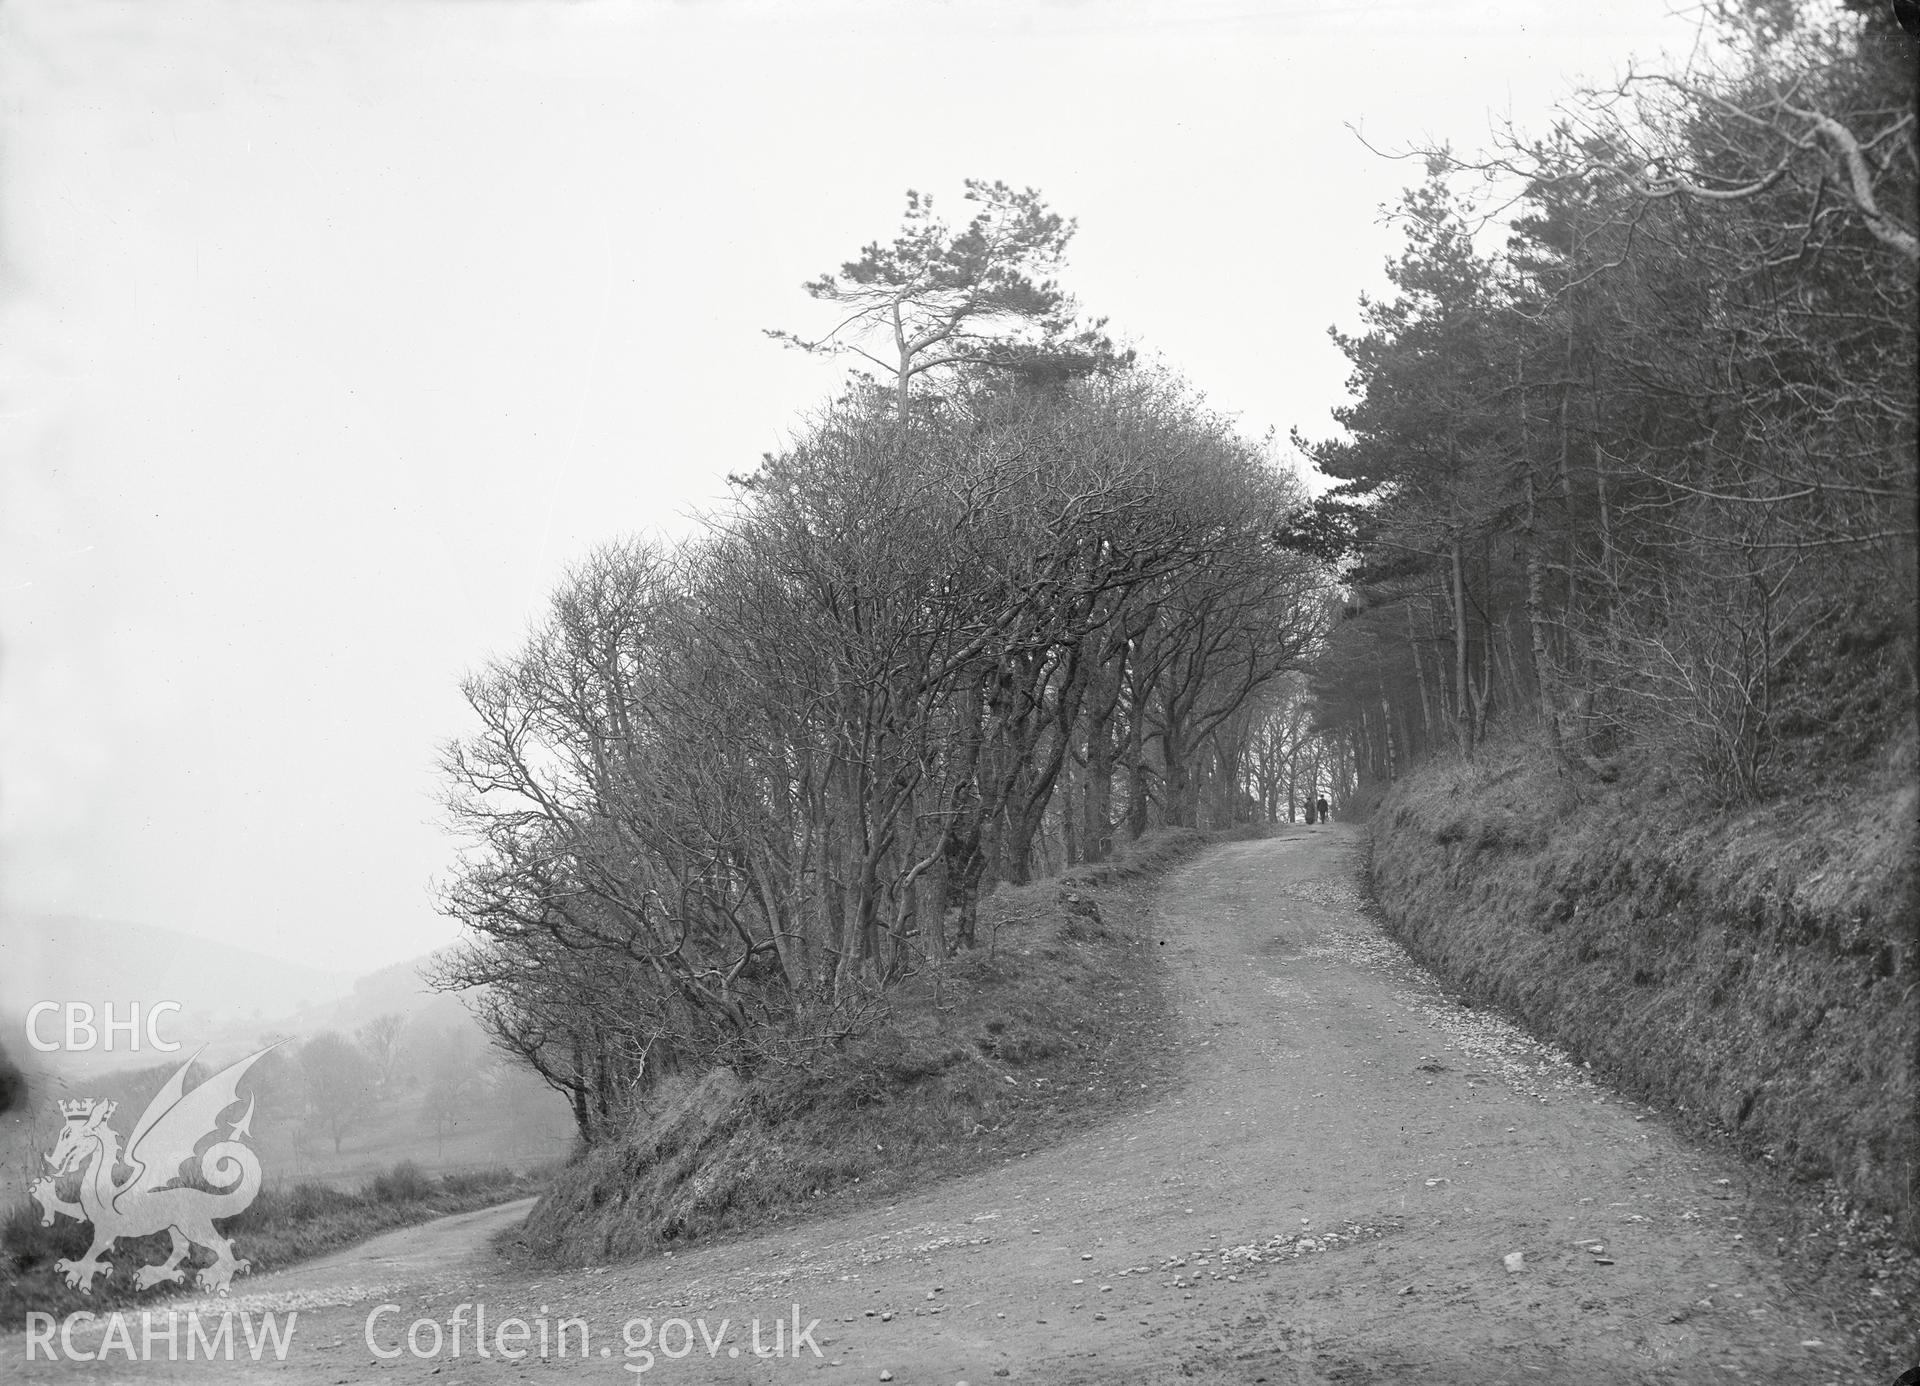 Black and white image dating from c.1910 showing Cwm Woods, Llangorwen,  taken by Emile T. Evans.